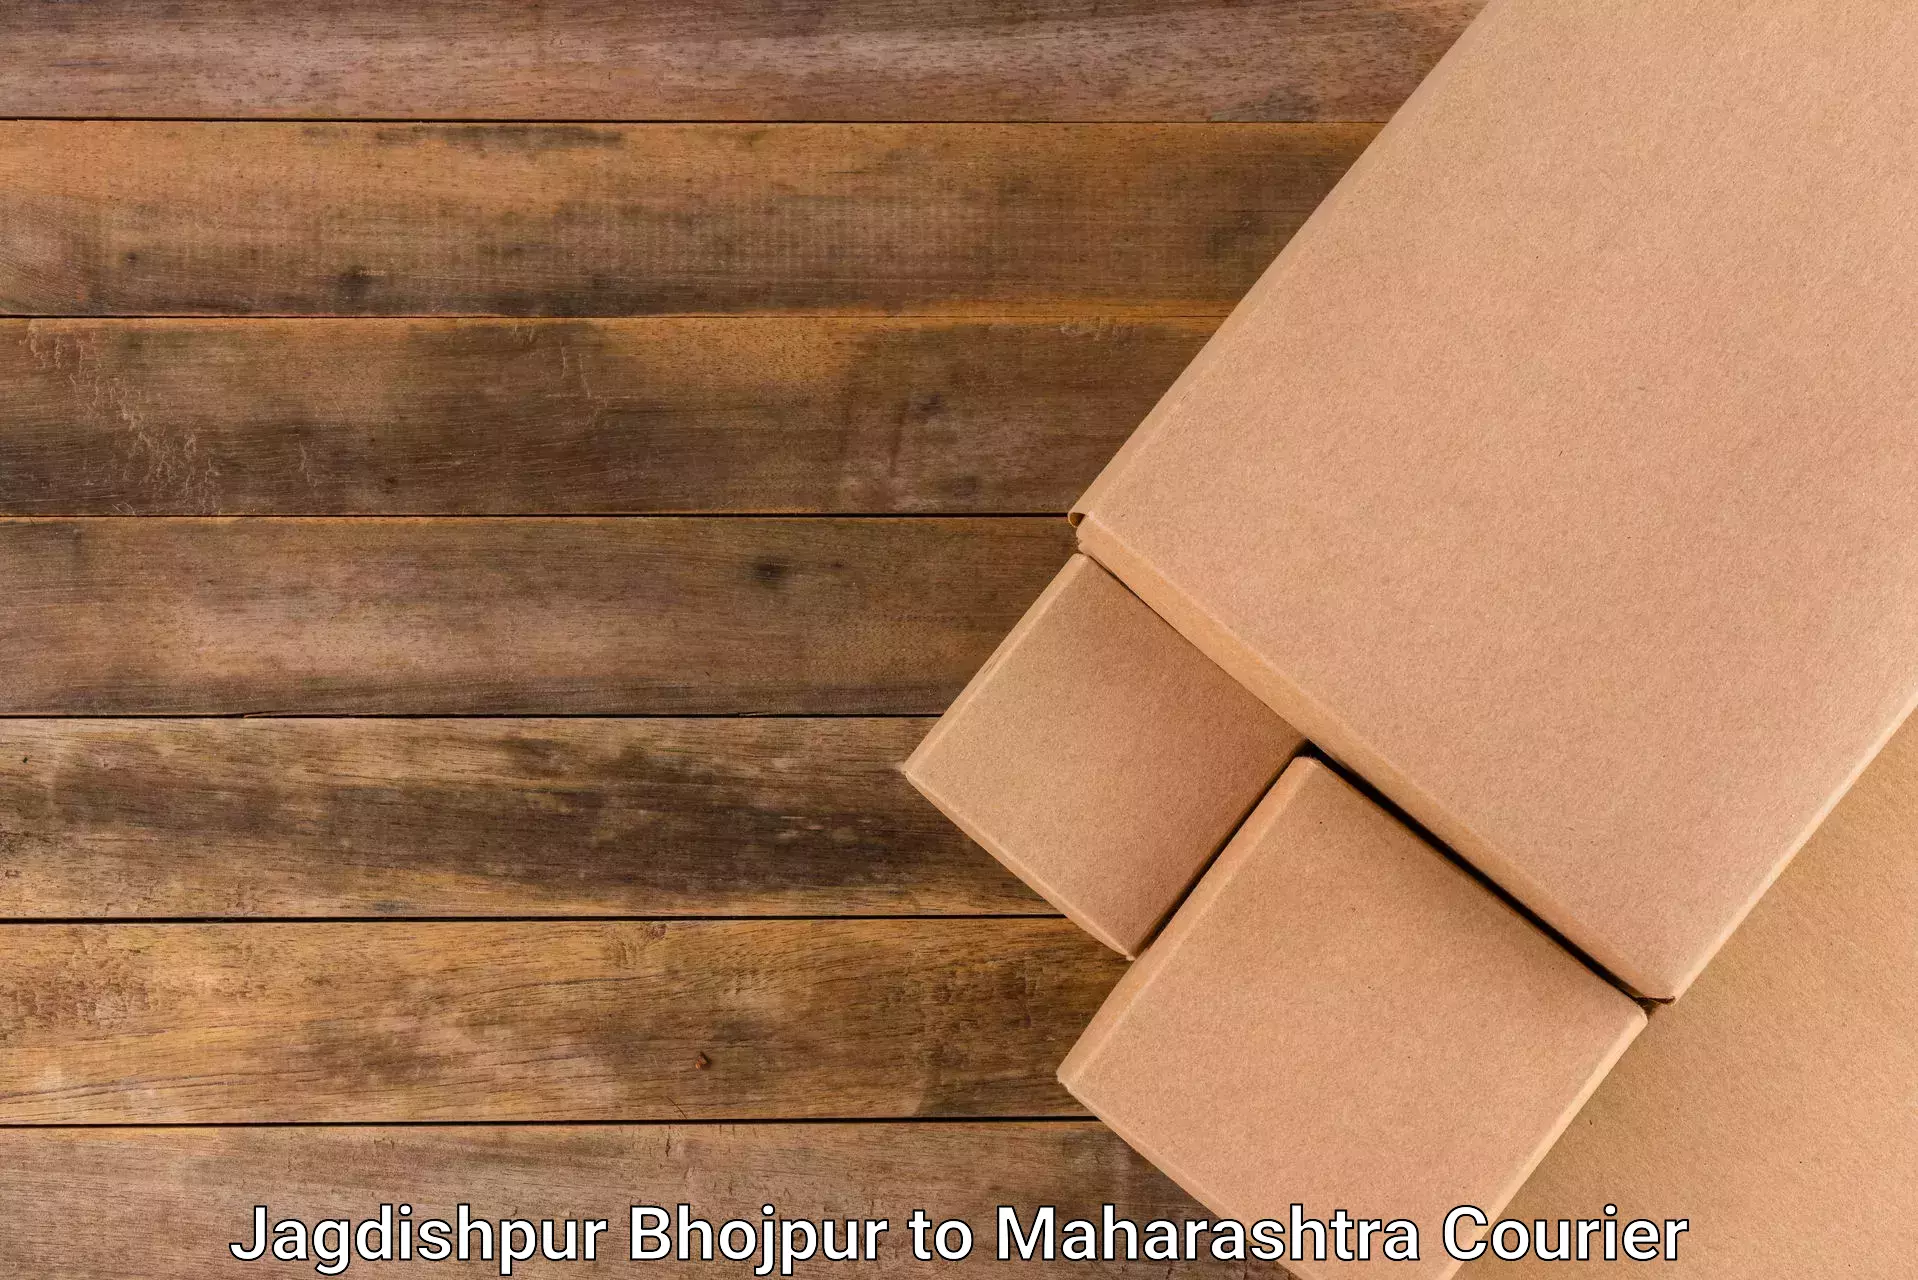 Nationwide shipping services Jagdishpur Bhojpur to Gondia